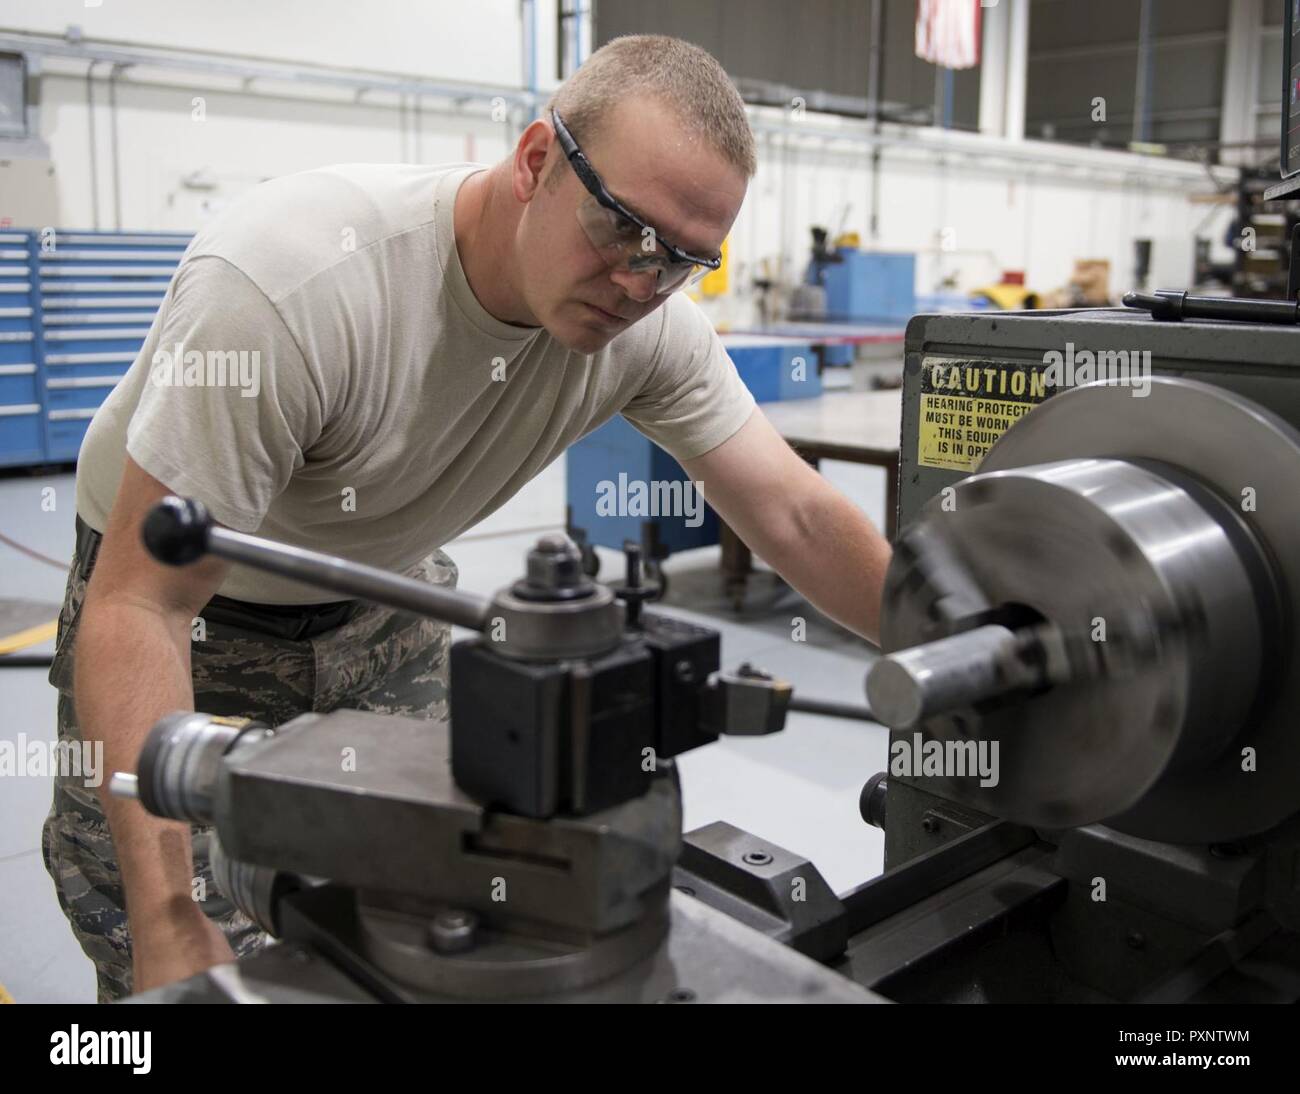 U.S. Air Force Staff Andrew Walker, a fabrication specialist with the 379th Expeditionary Maintenance Squadron uses a manual lathe to create a cylindrical part at Al Udeid Air Base, Qatar, June 5, 2017. Walker is part of a team of machinists and welders which are trained on a wide range of manual and computer numerical controlled machines to manufacture and repair aircraft components and support equipment. Stock Photo